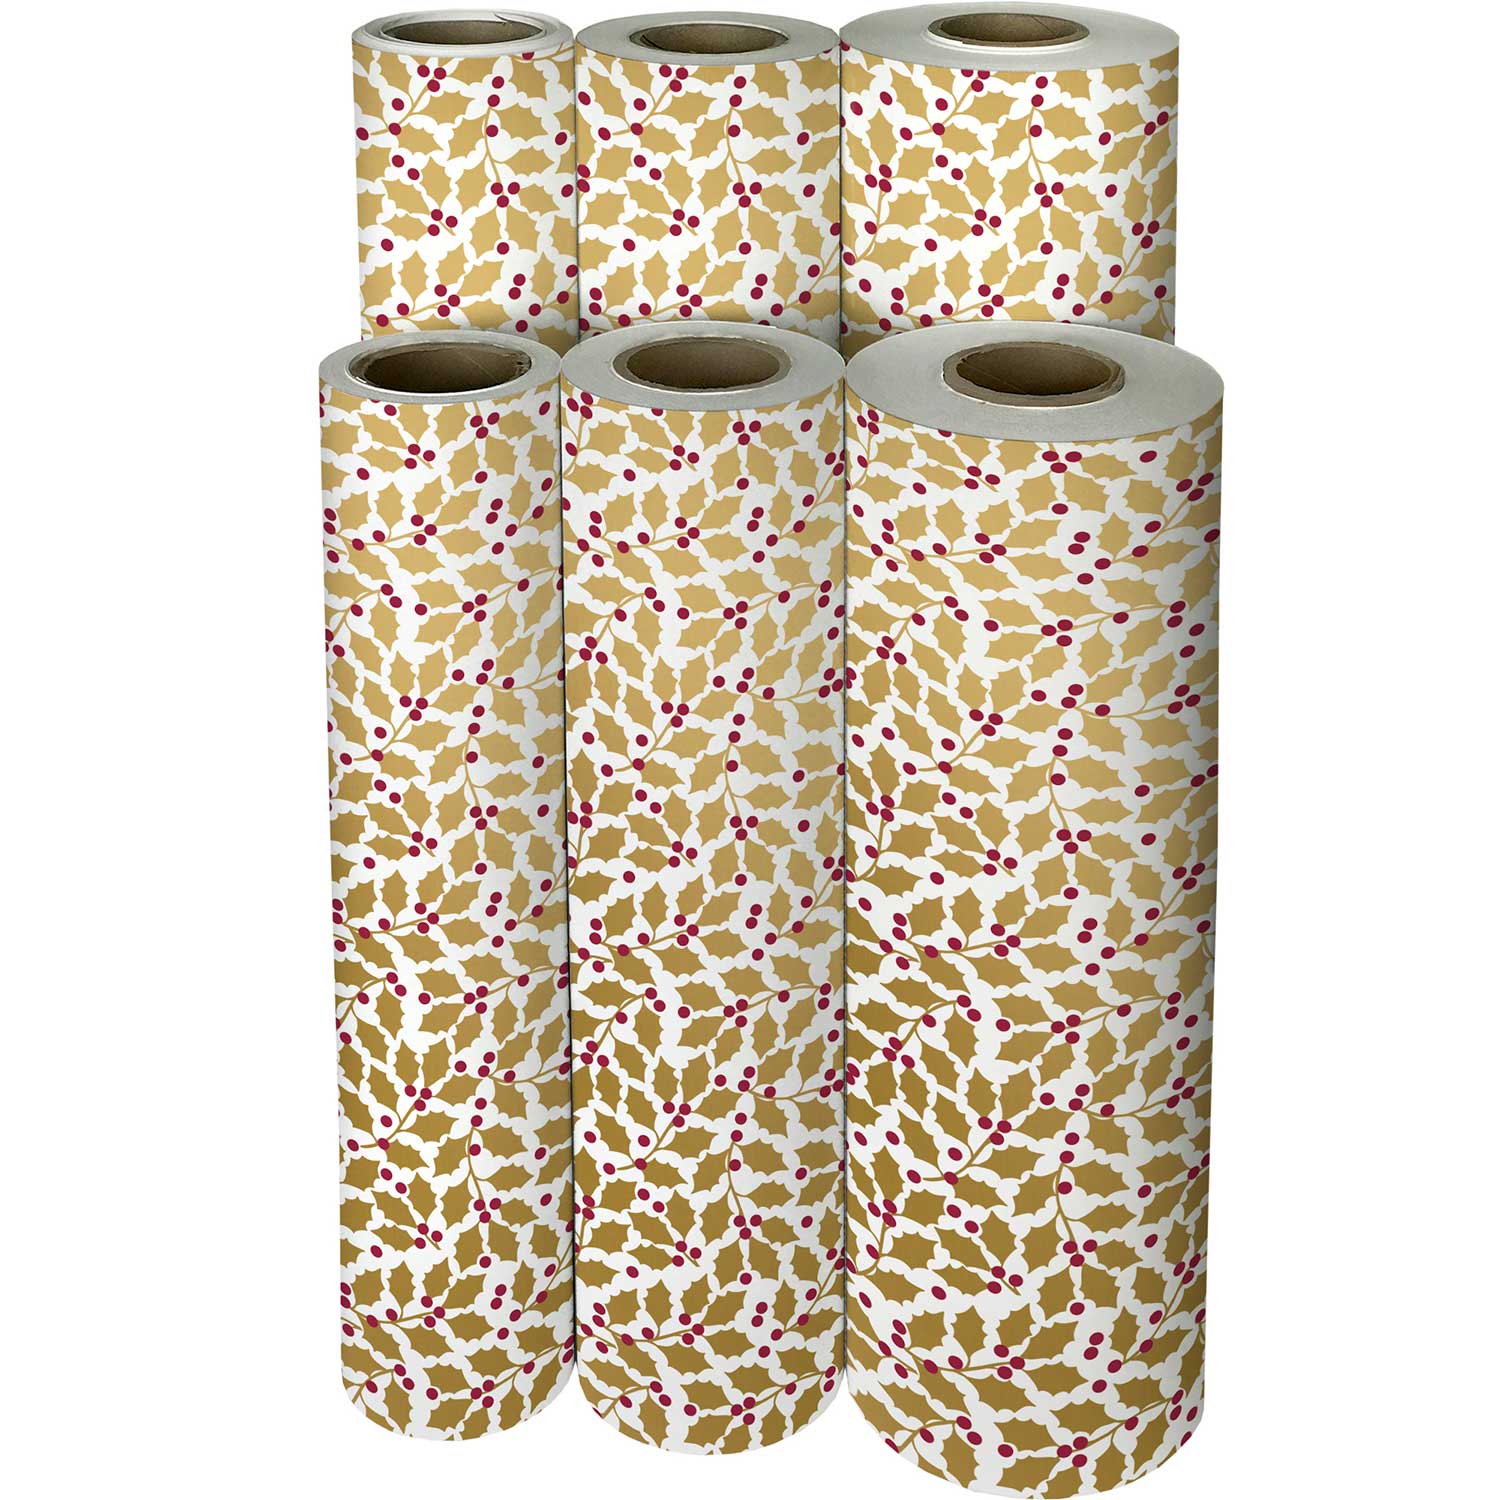 Drifting Blossoms Floral Gift Wrap Full Ream 833 ft x 30 in